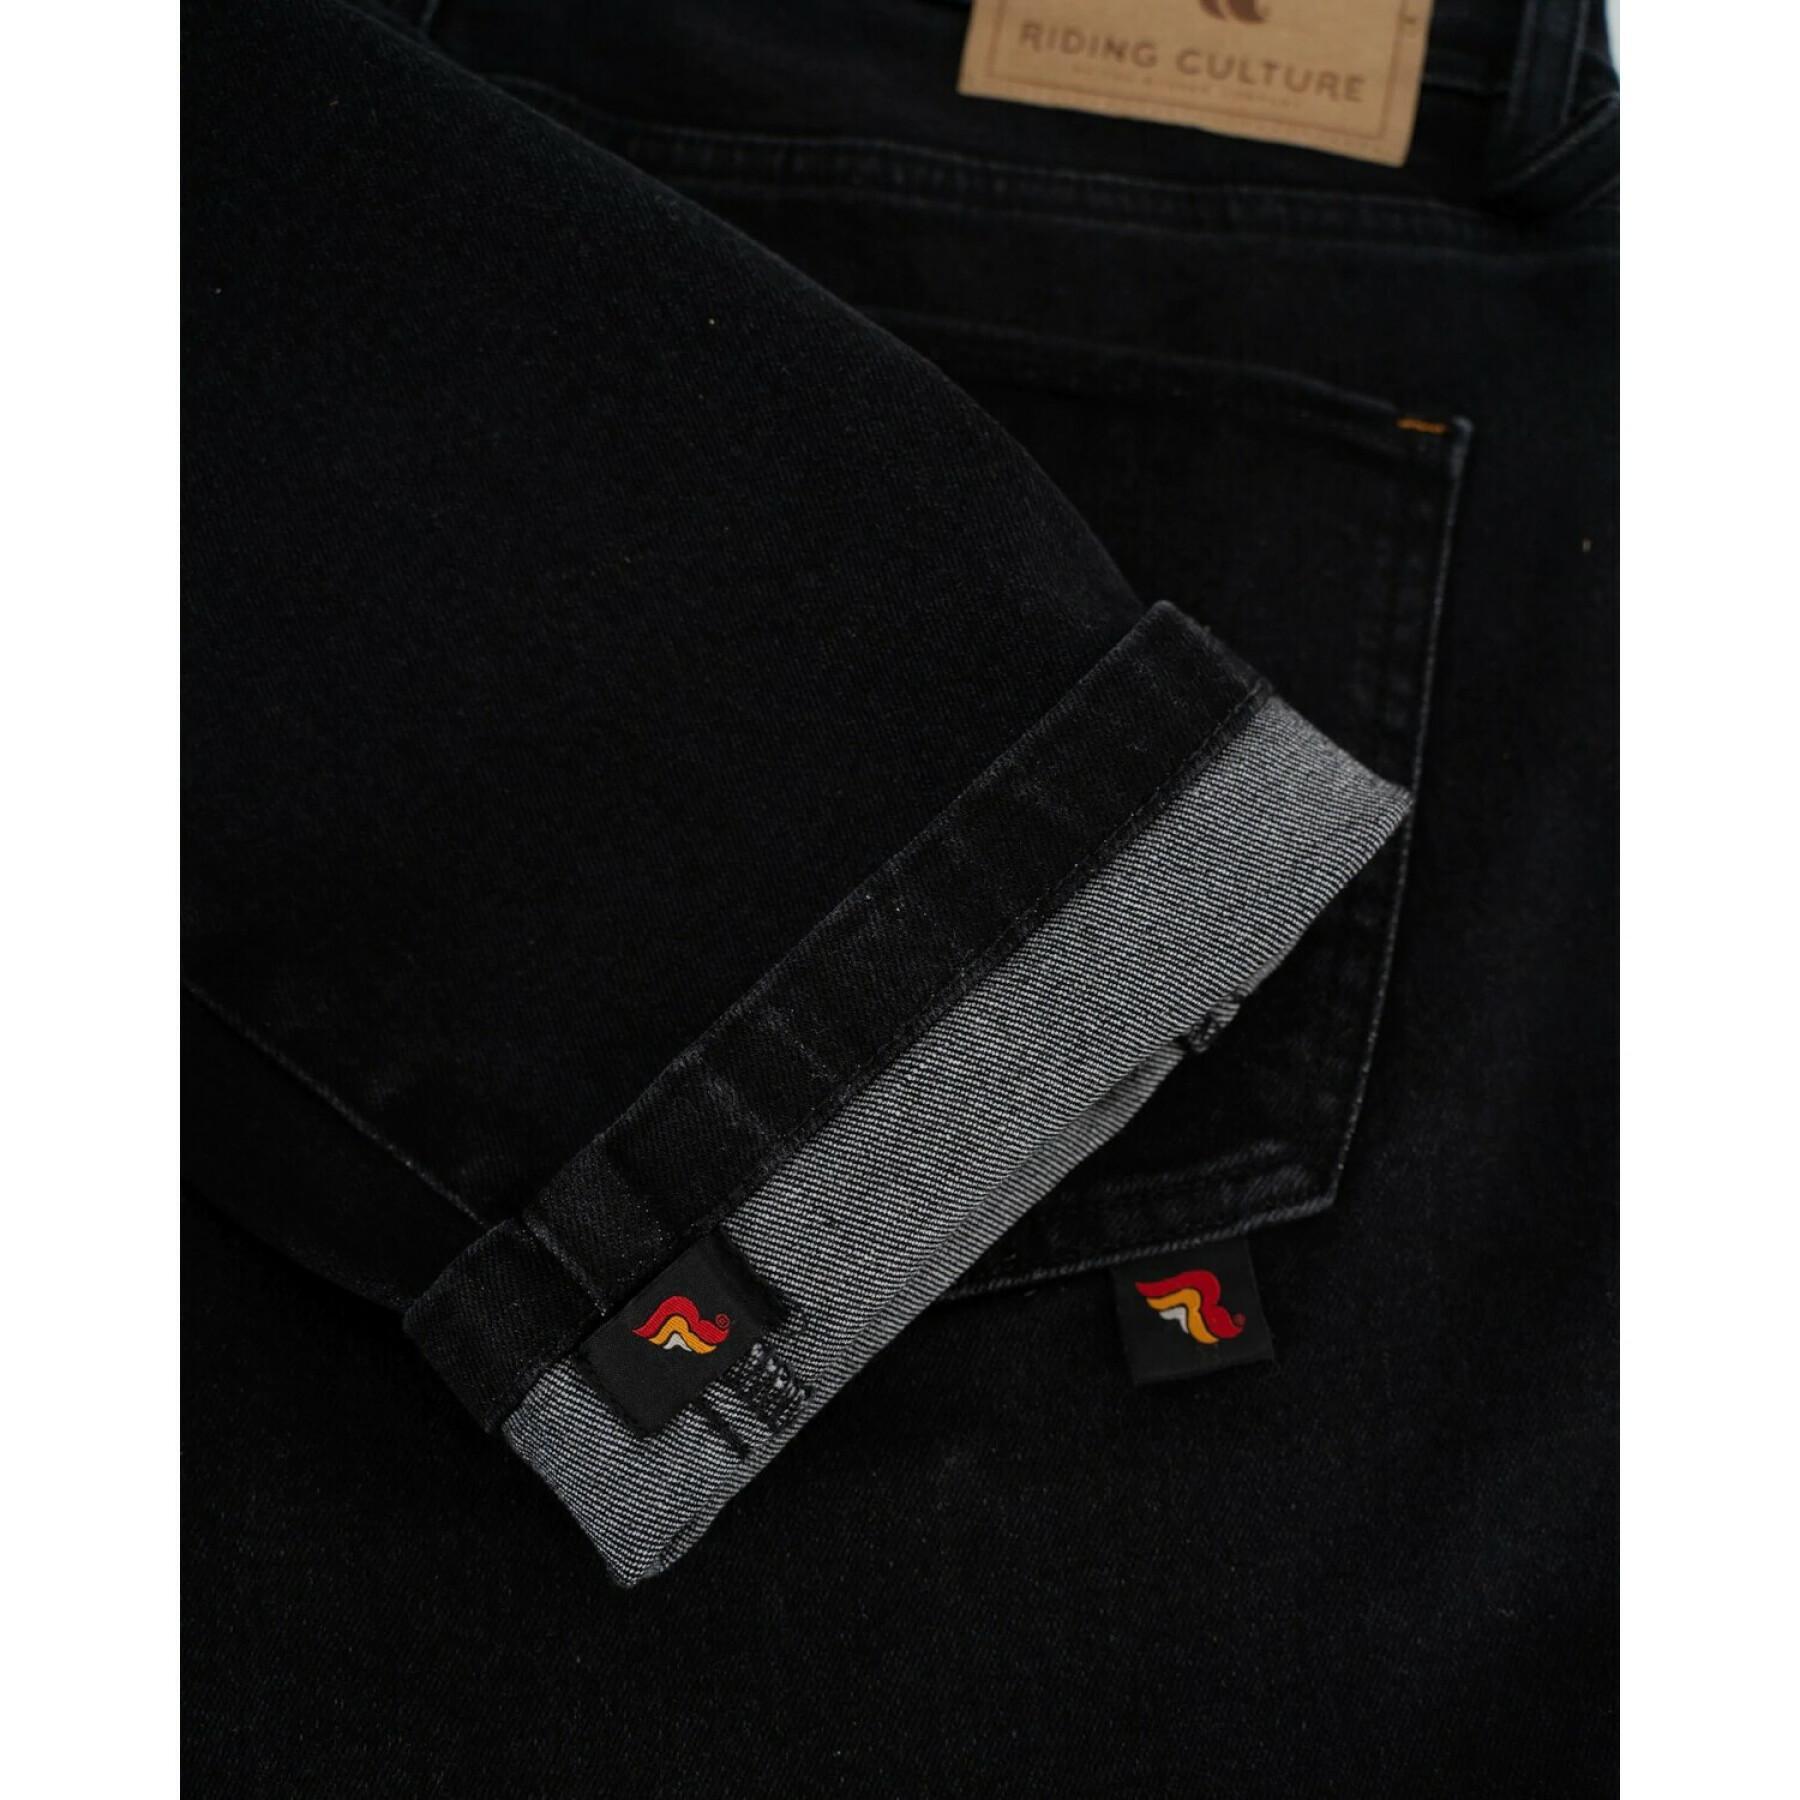 Jeans Riding Culture Tapered Slim L32